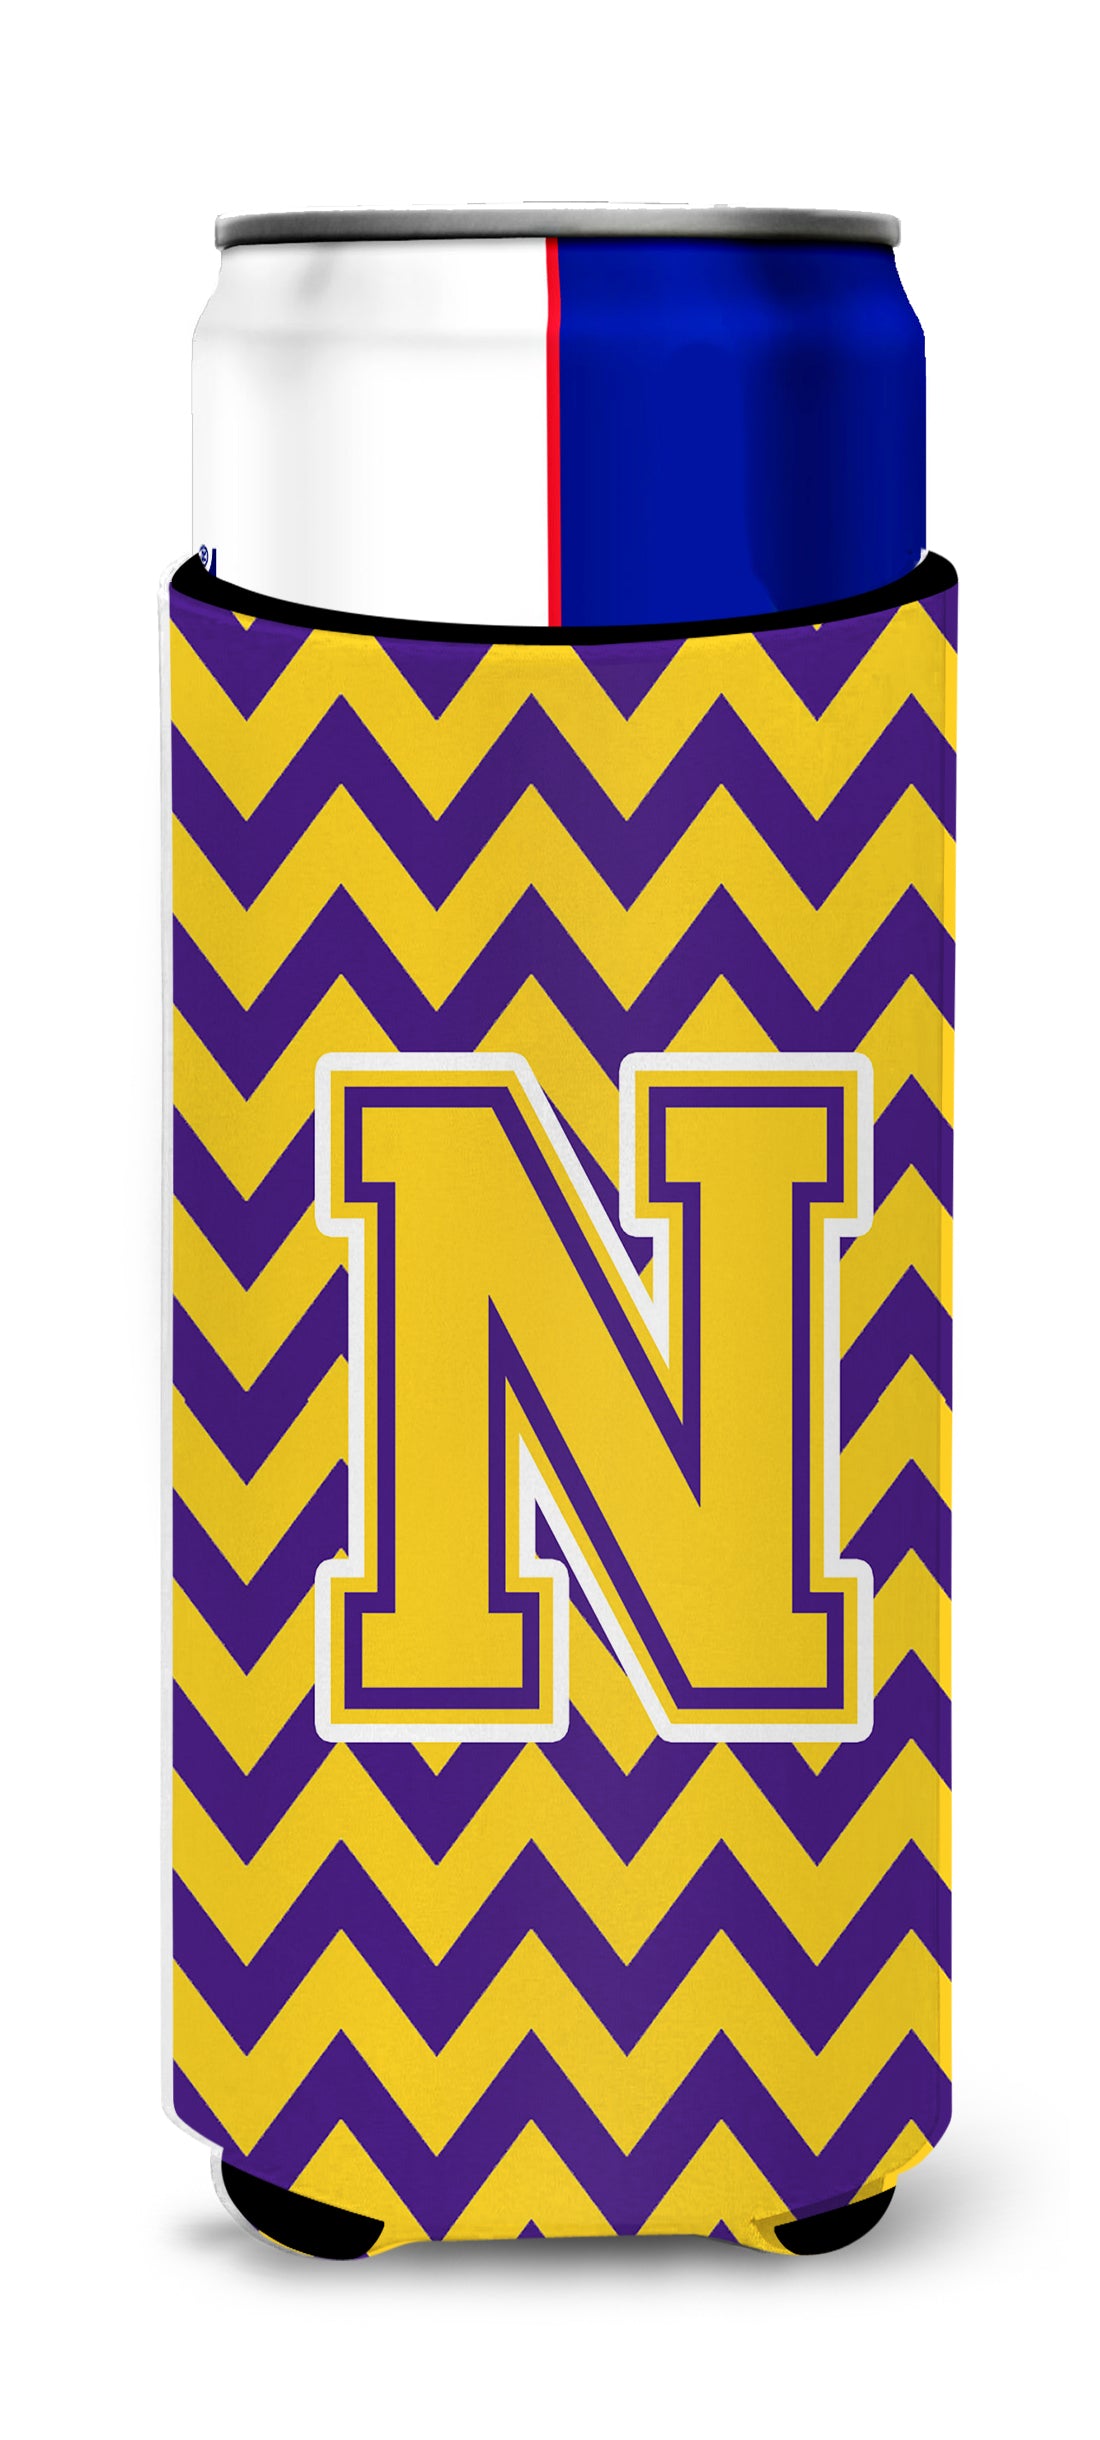 Letter N Chevron Purple and Gold Ultra Beverage Insulators for slim cans CJ1041-NMUK.